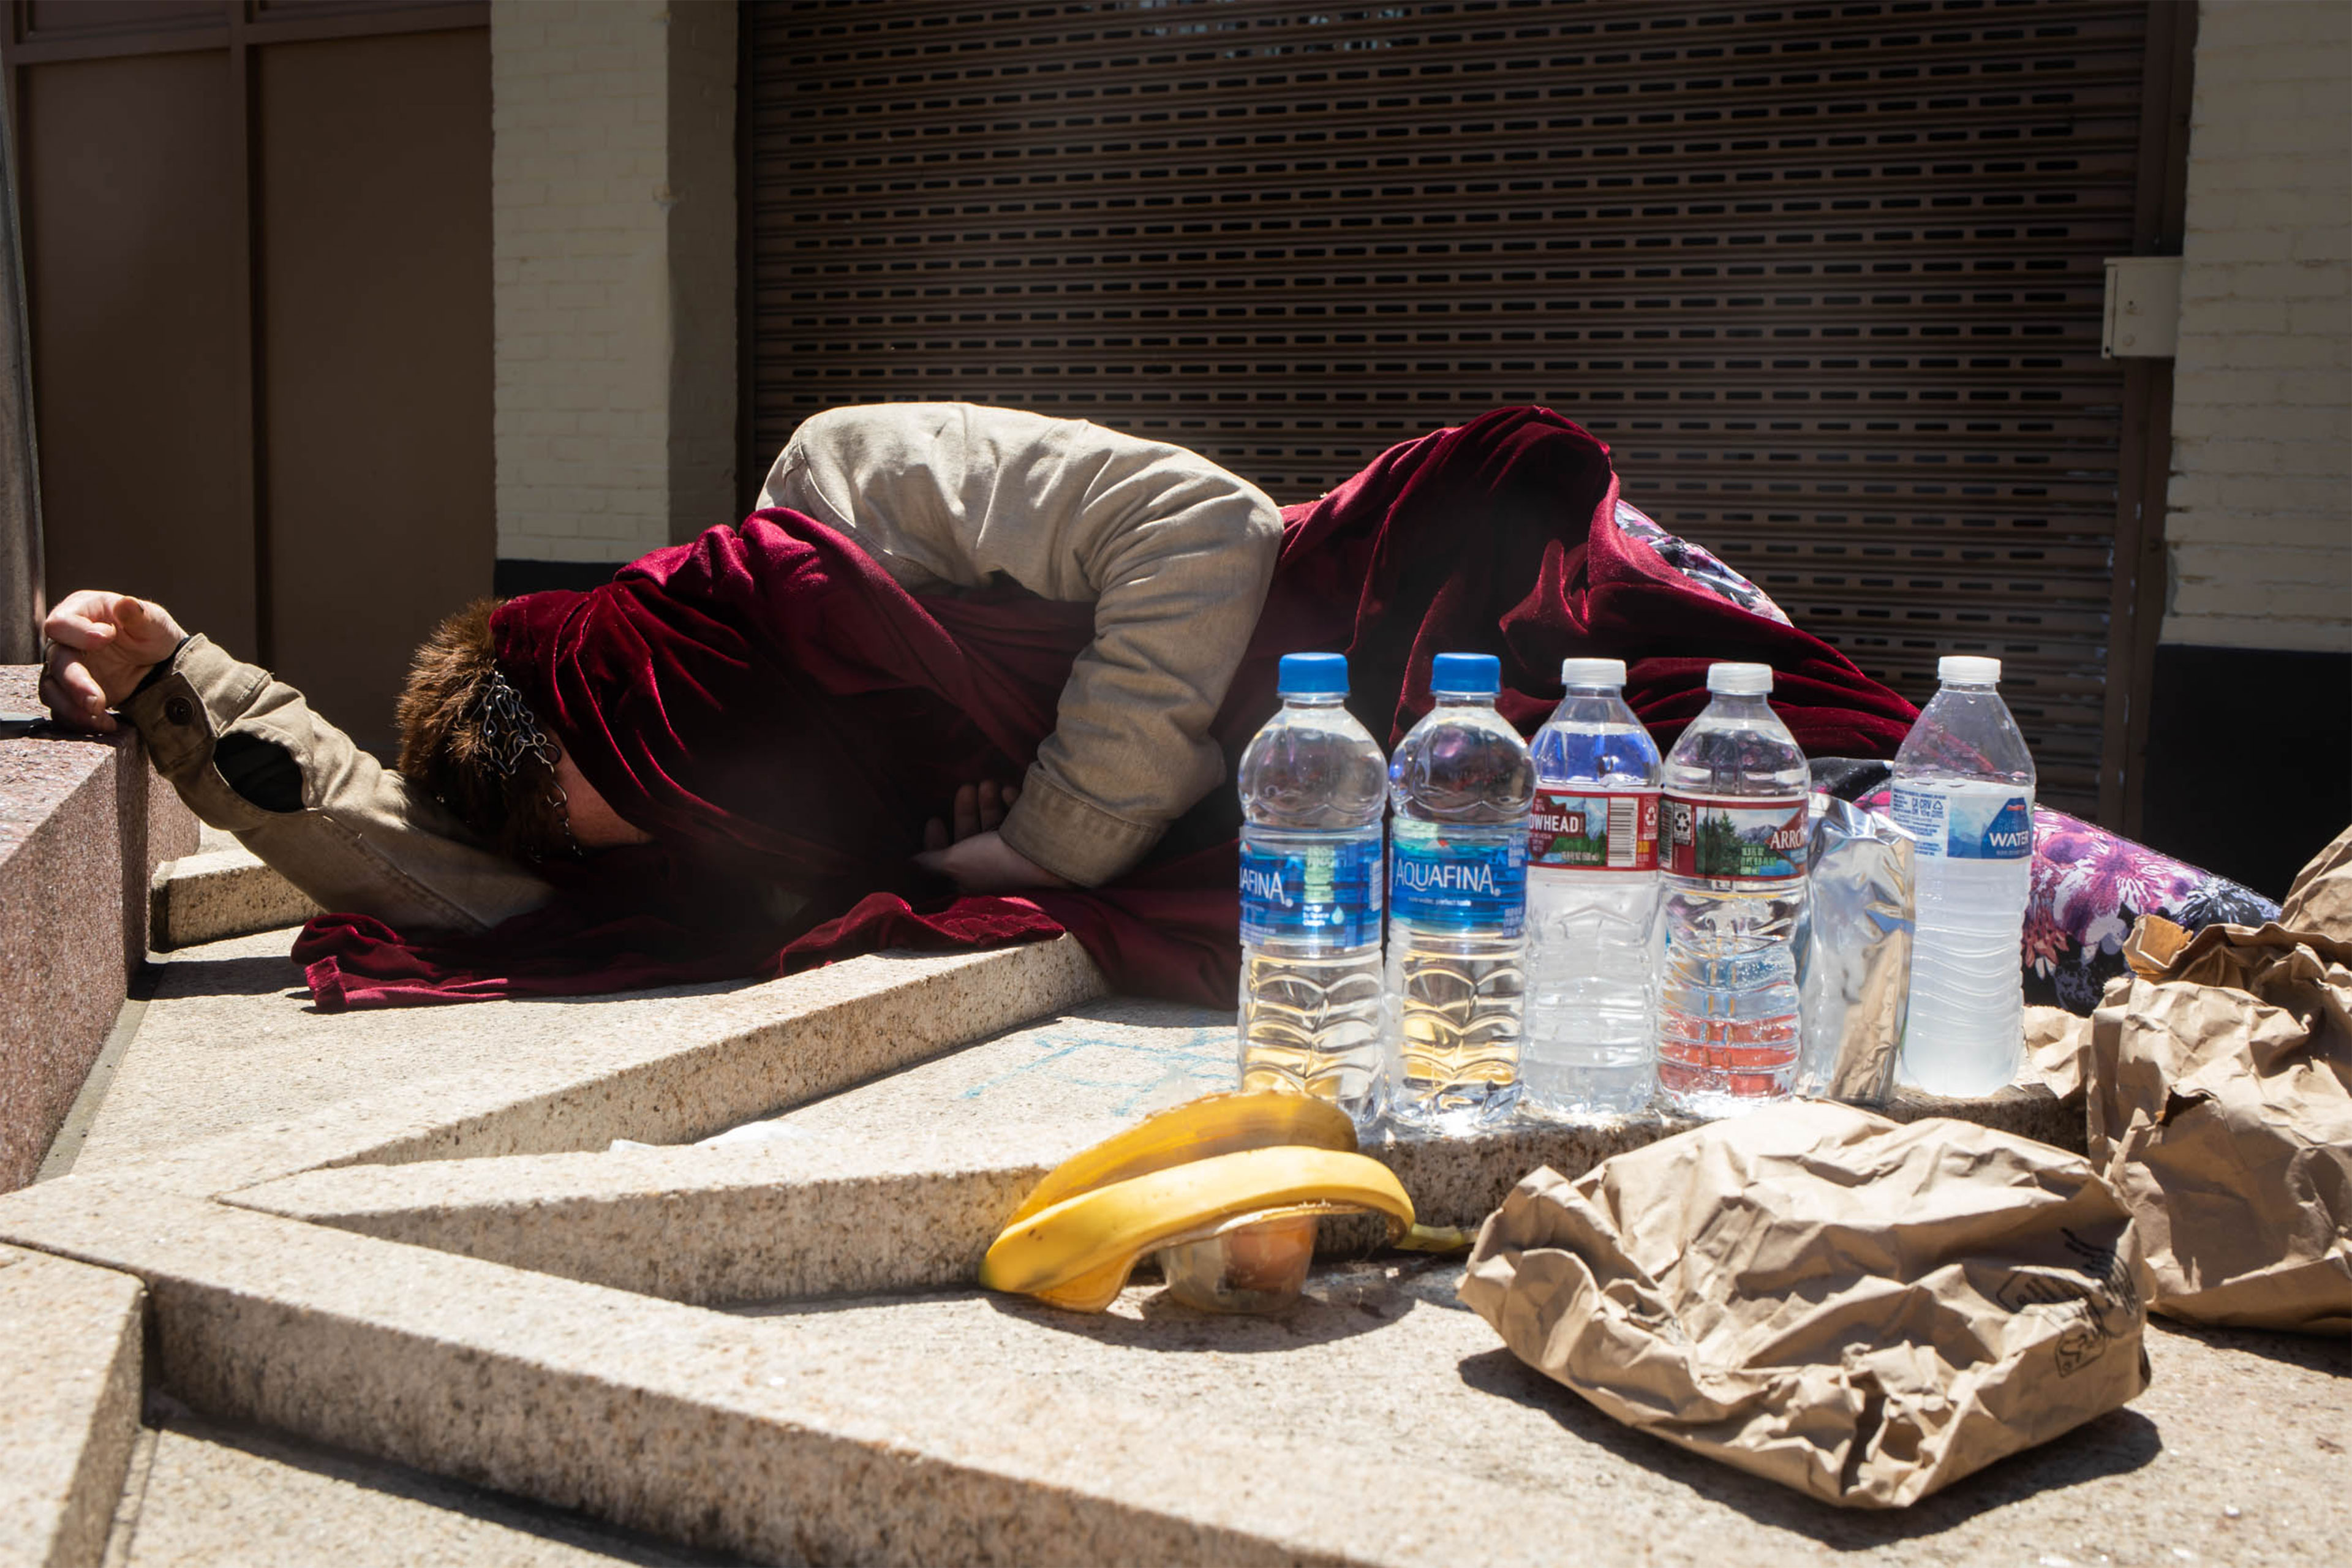 A photo of a person lying down on the ground with a blanket covering them next to water bottles and bags of food.